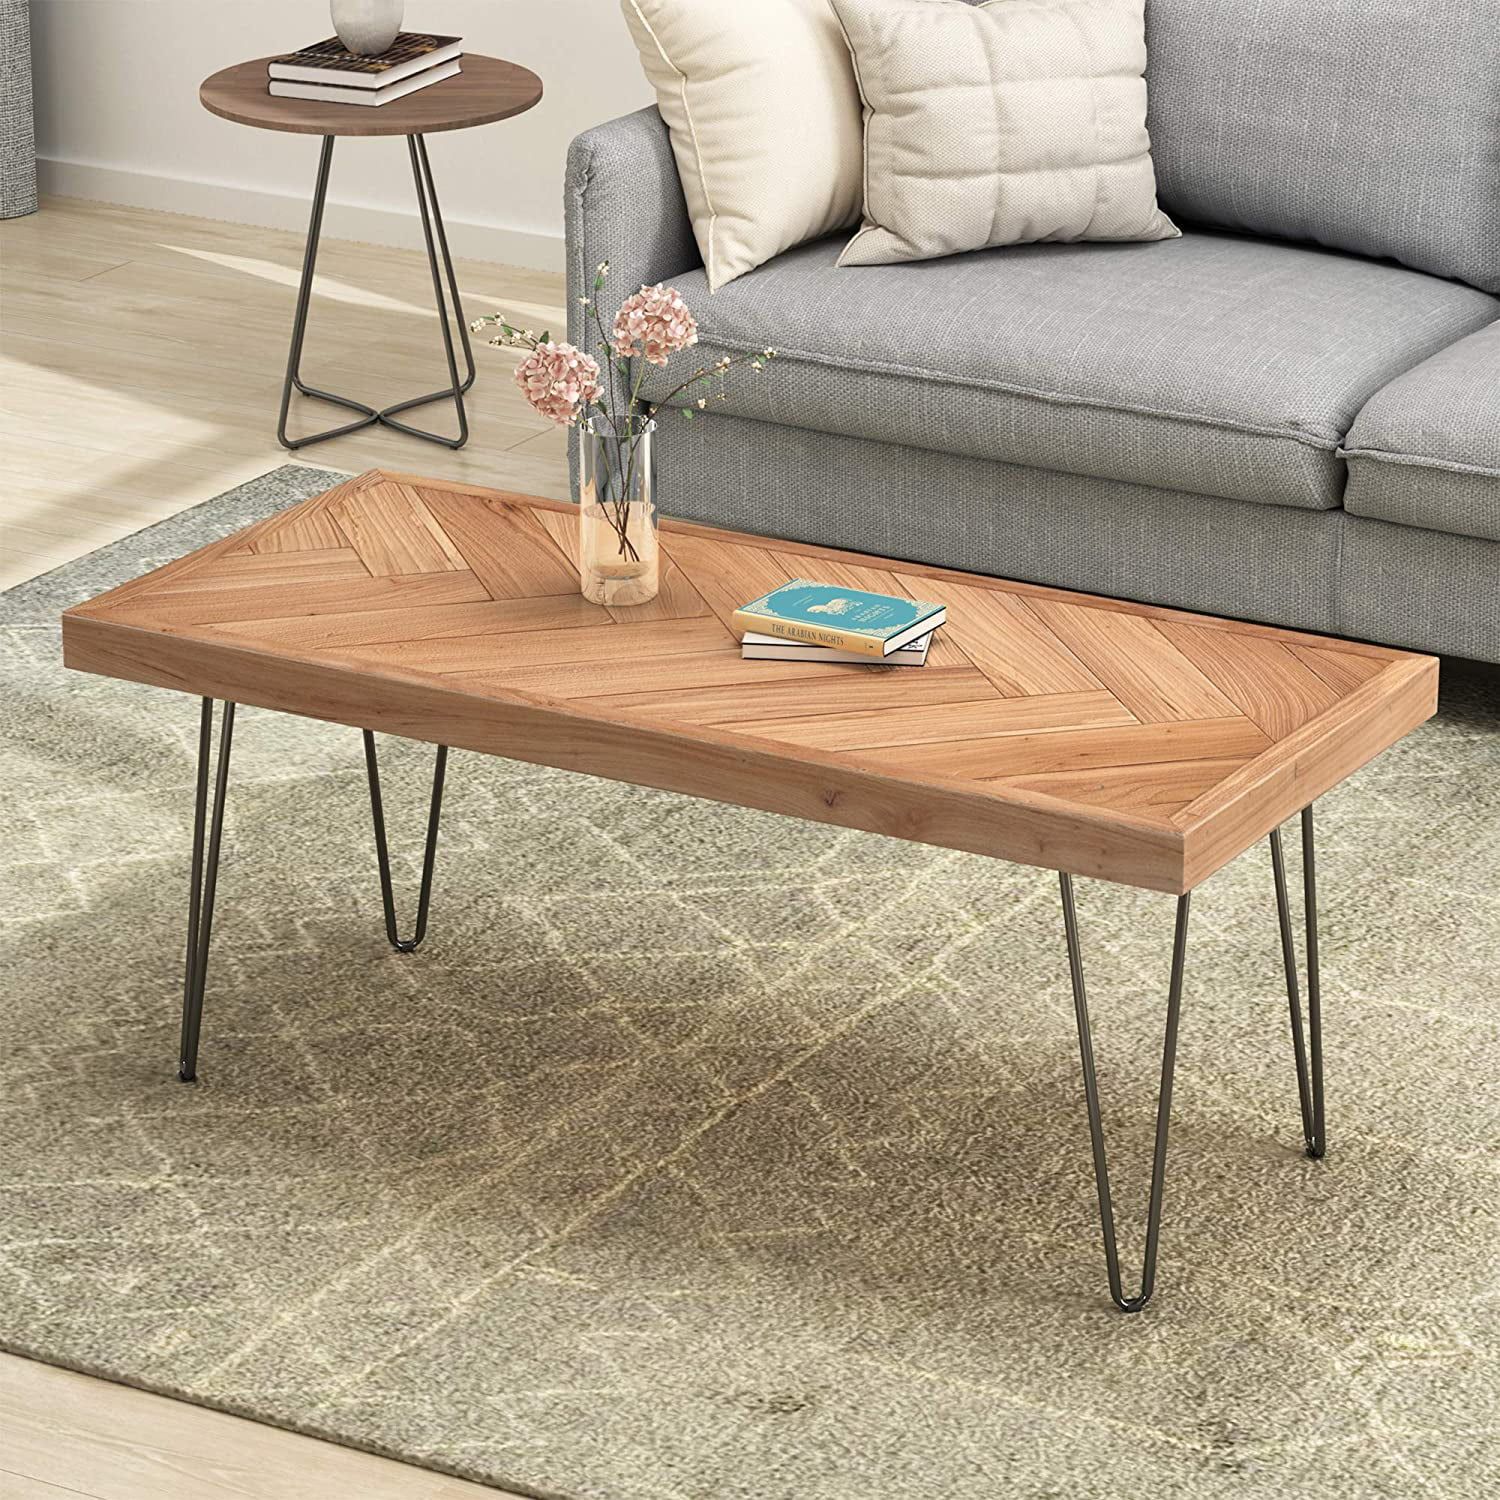 Modern Wood Coffee Table, Nature Cocktail Table For Living Room Chevron With Regard To Coffee Tables With Solid Legs (Gallery 19 of 20)